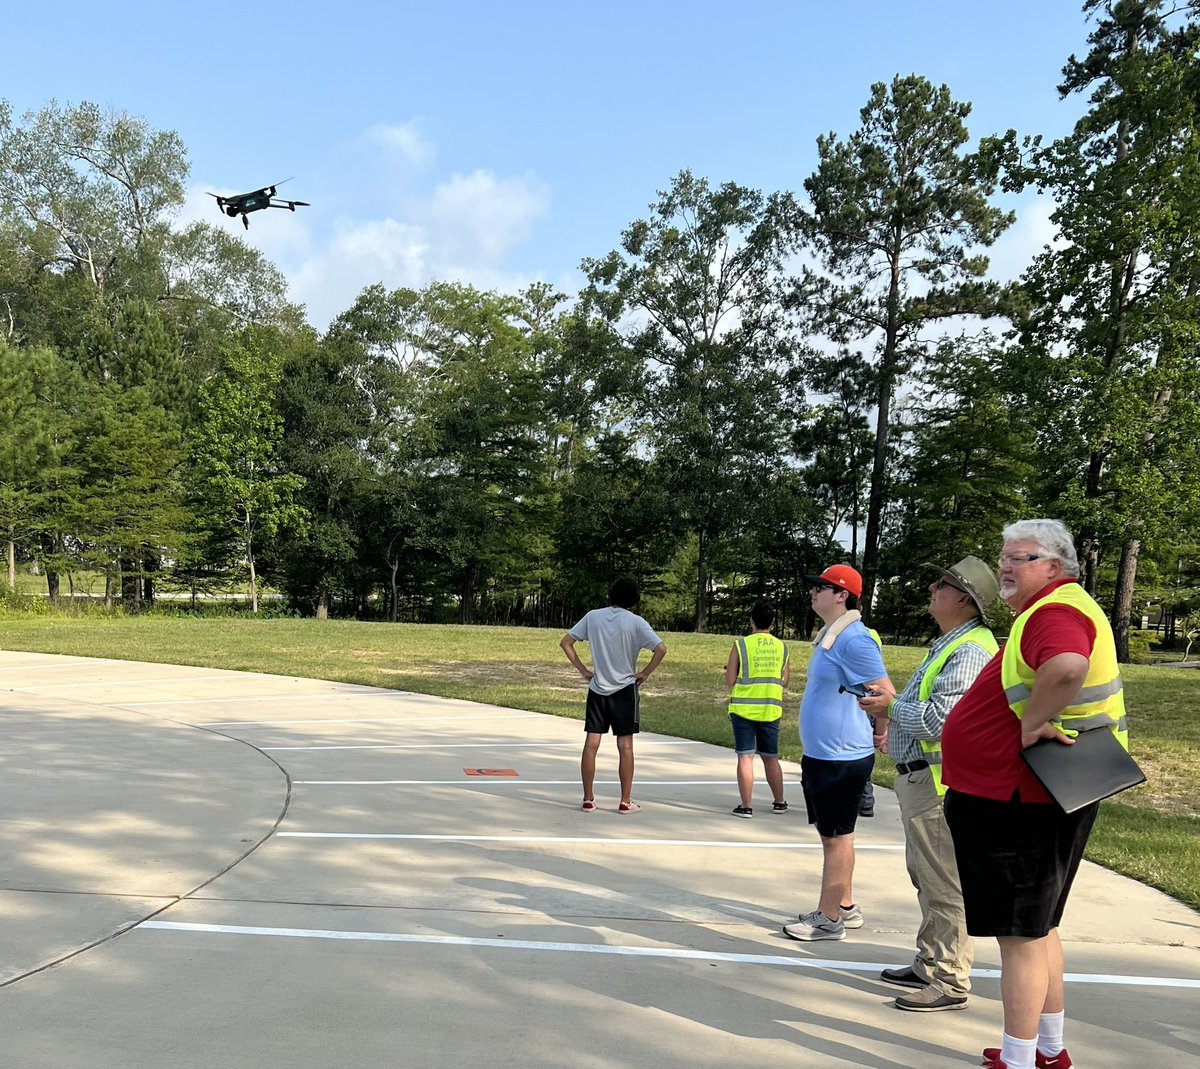 Beautiful morning for some drone flight practice with our new teachers! #drone #droneeducation #STEMeducation